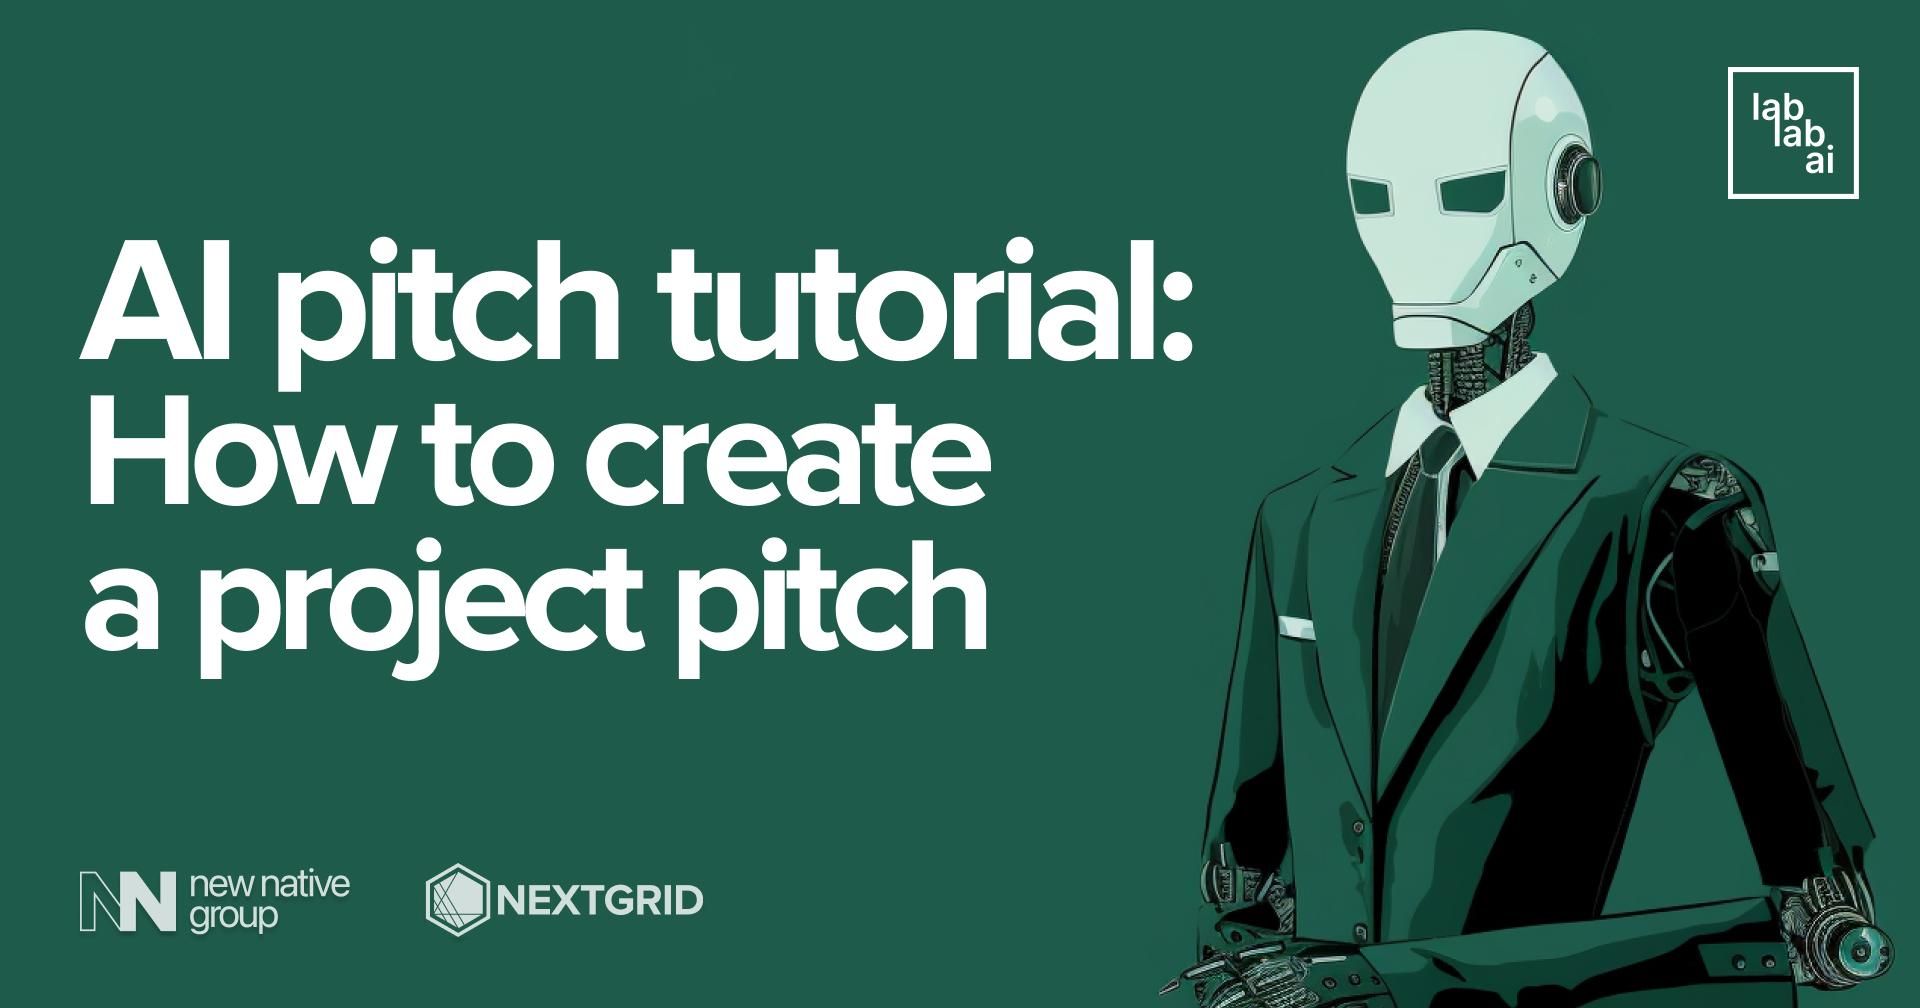 How to create an AI pitch: Guidelines for Creating a Project Pitch